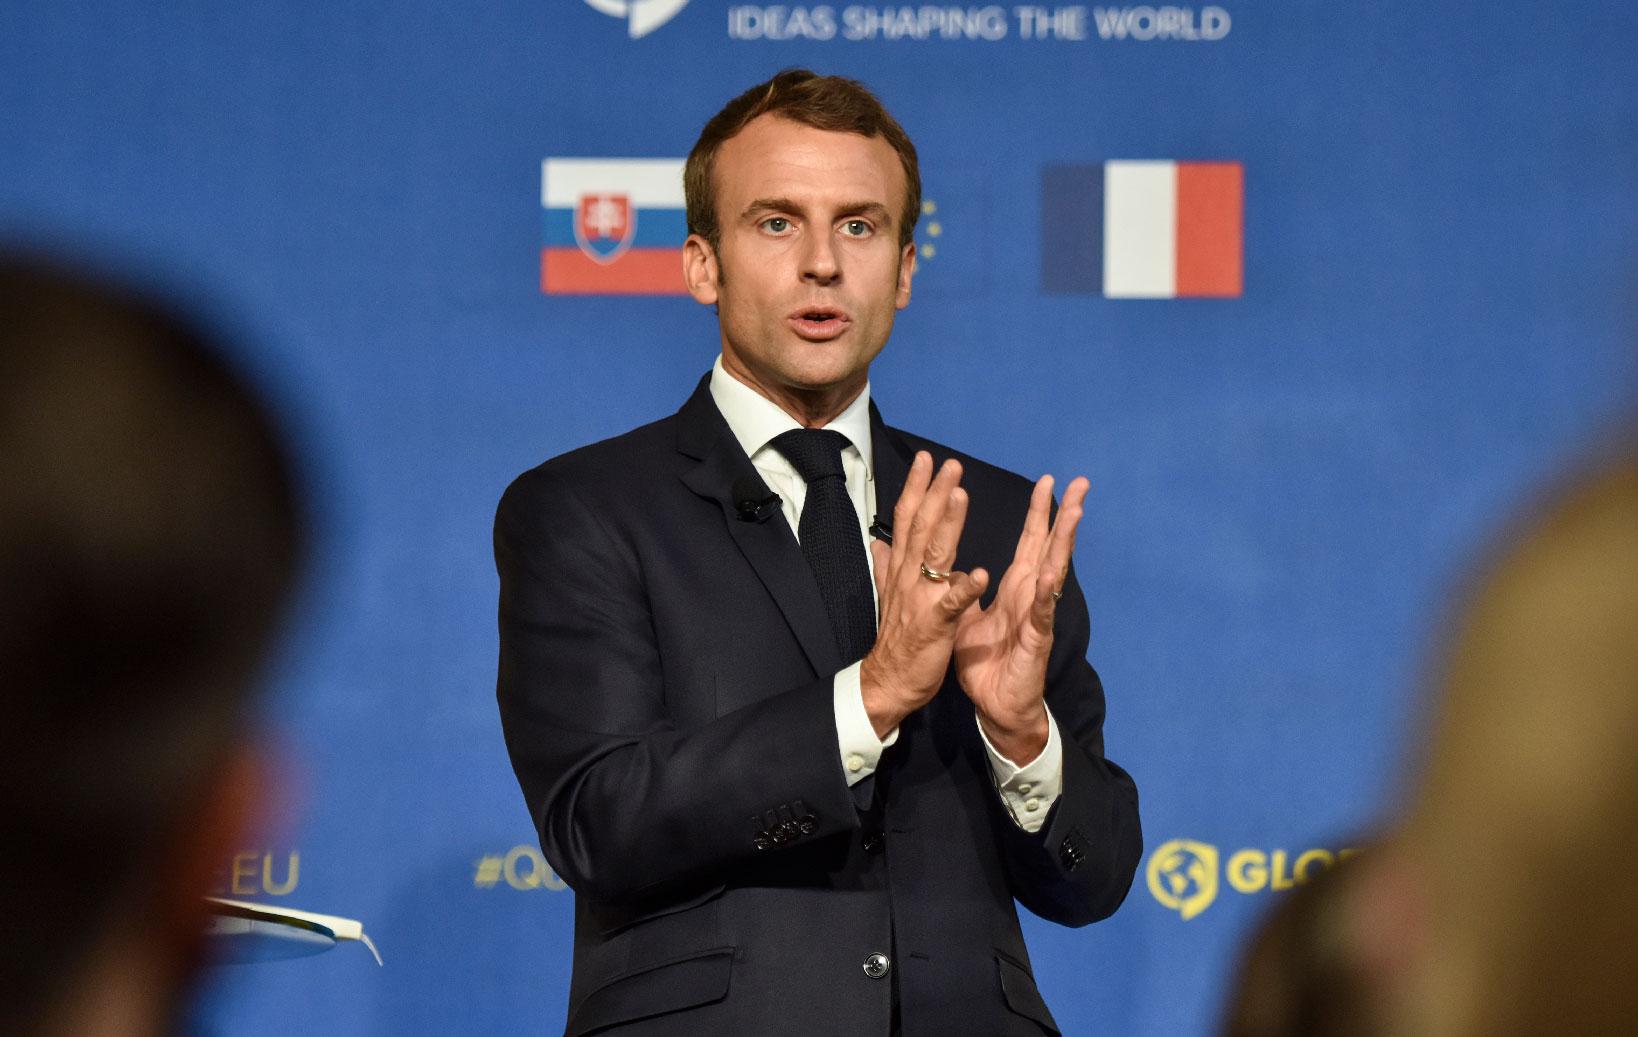 French President Emmanuel Macron speaks during the event 'Forming the Future of Europe' on 26 October 2018 in Bratislava, Slovakia.